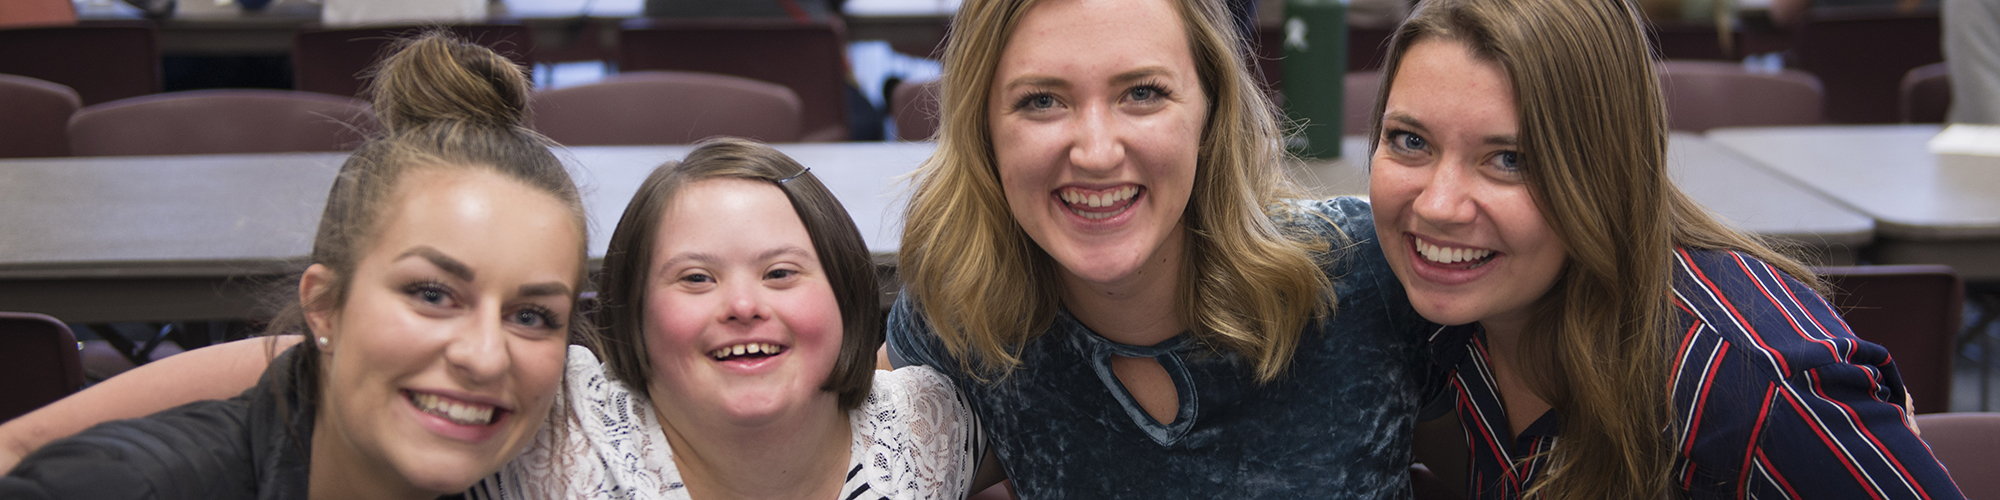 Students sit with a girl with Down syndrome.